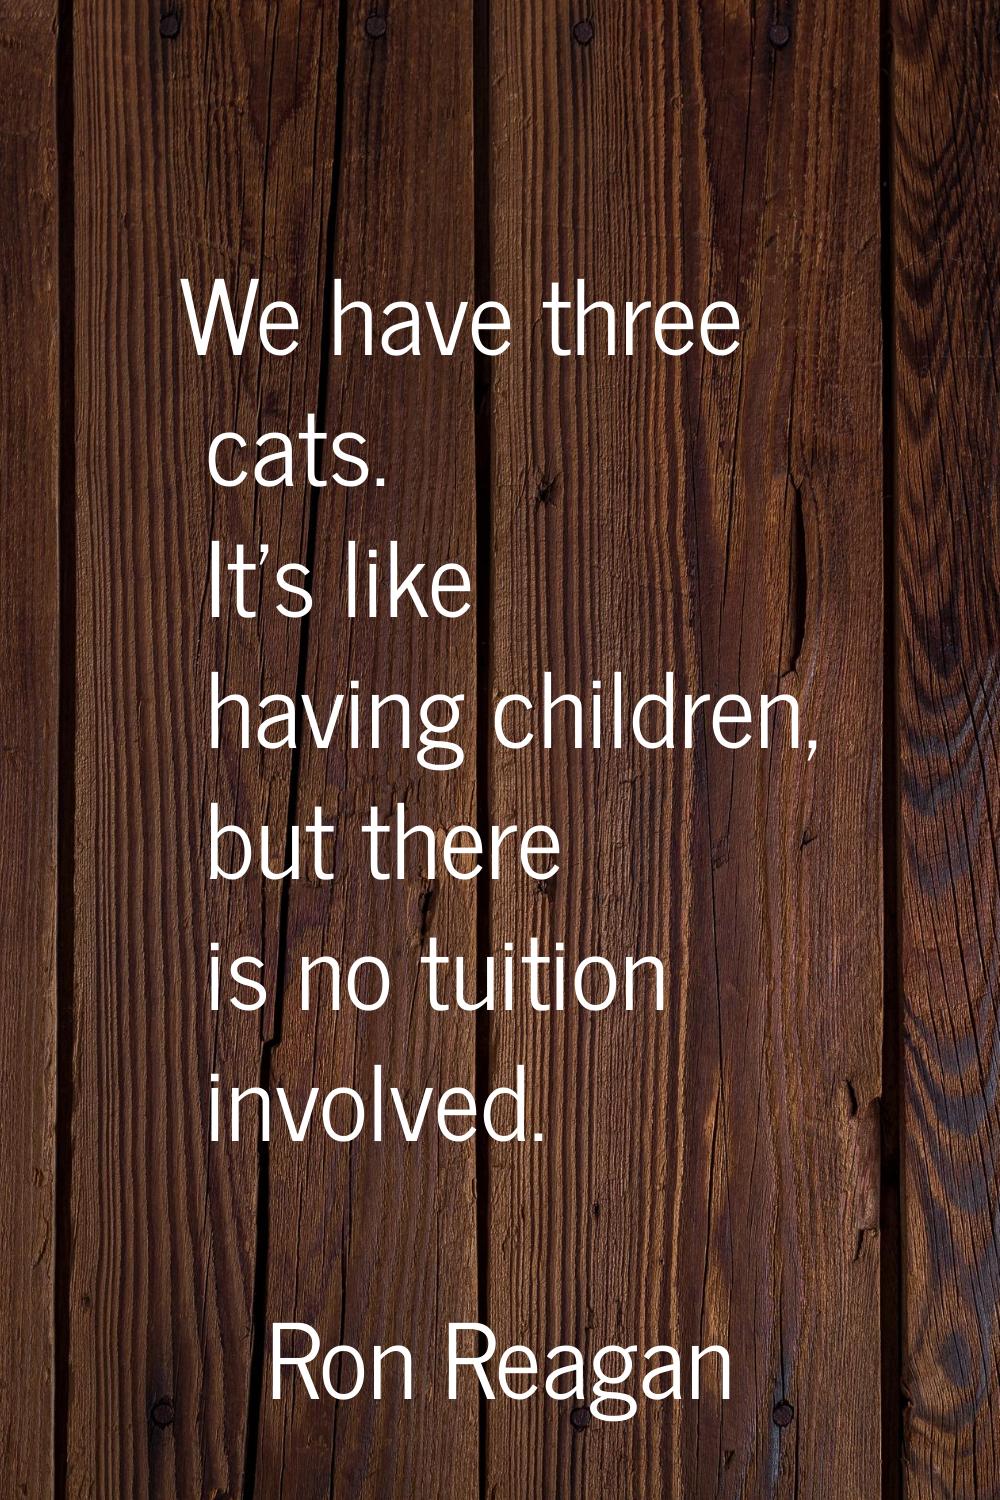 We have three cats. It's like having children, but there is no tuition involved.